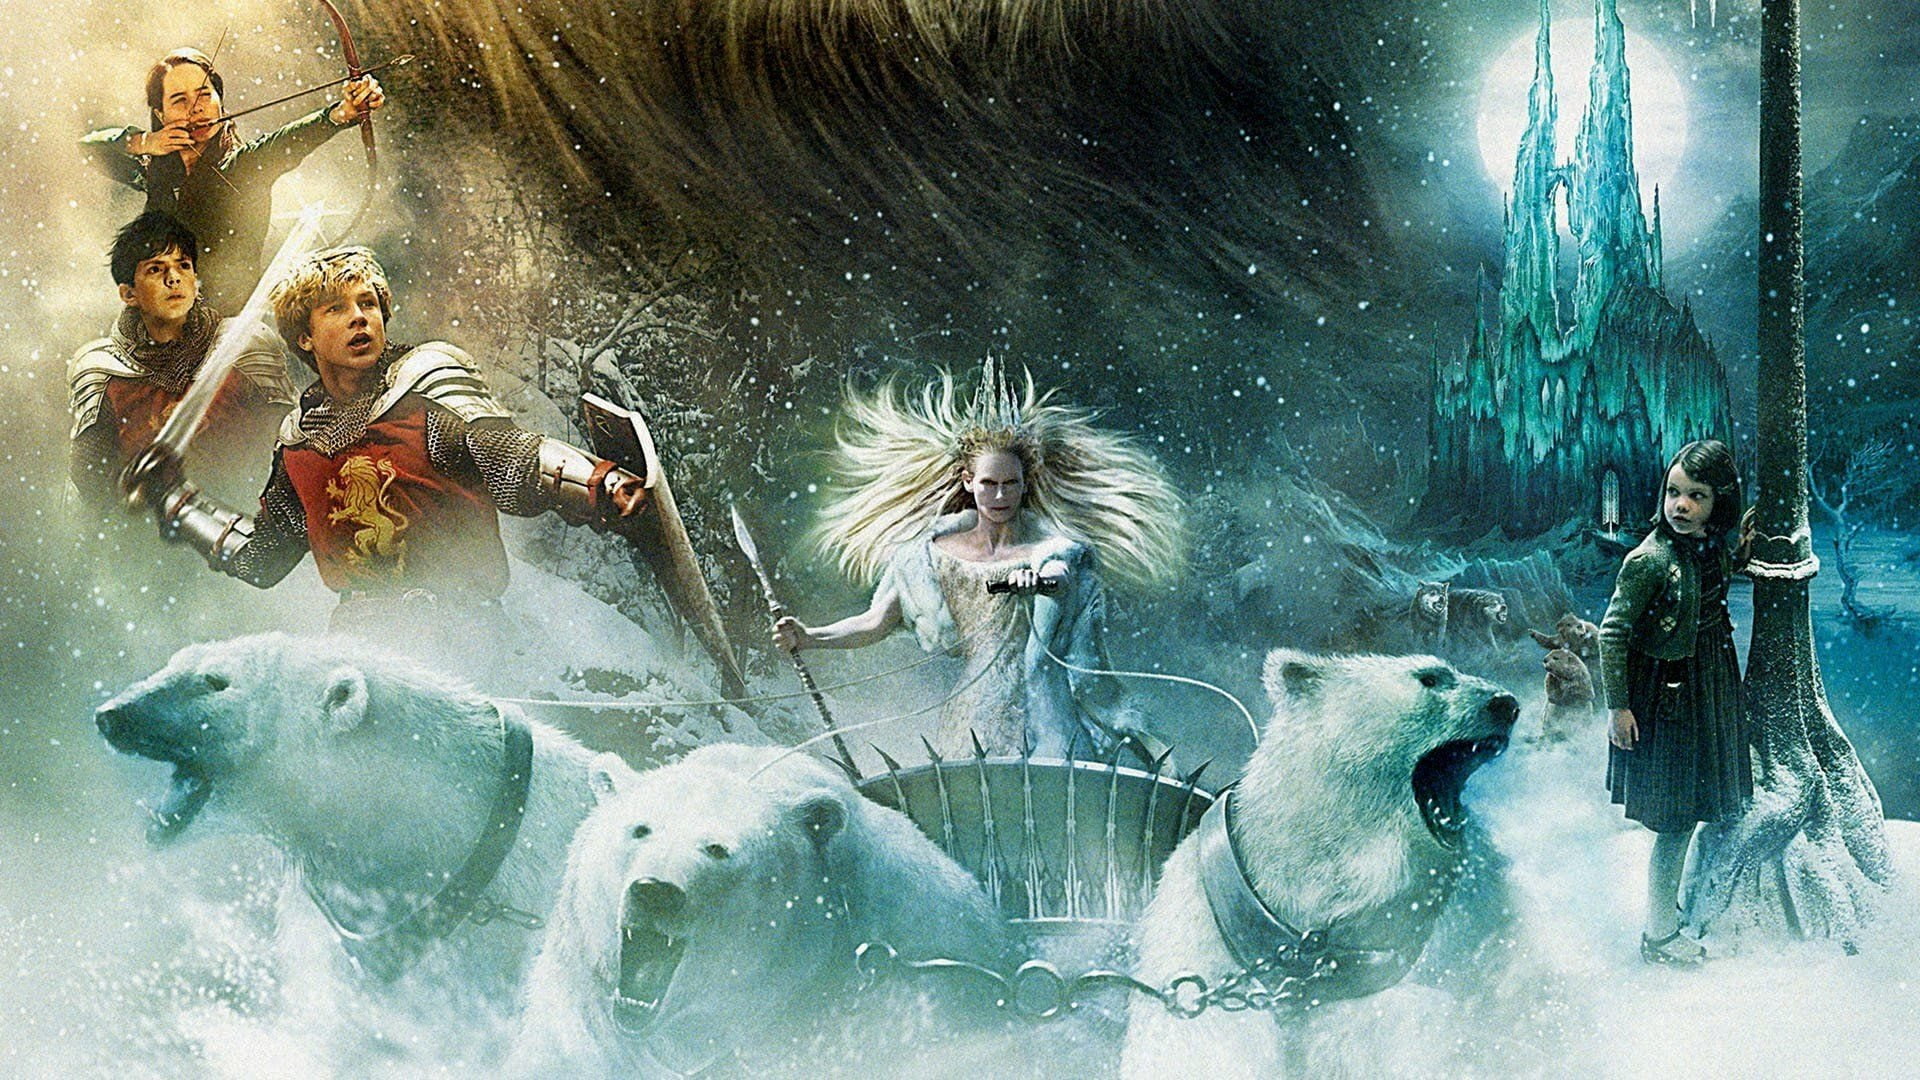 Movie, The Chronicles of Narnia: The Lion, the Witch and the Wardrobe